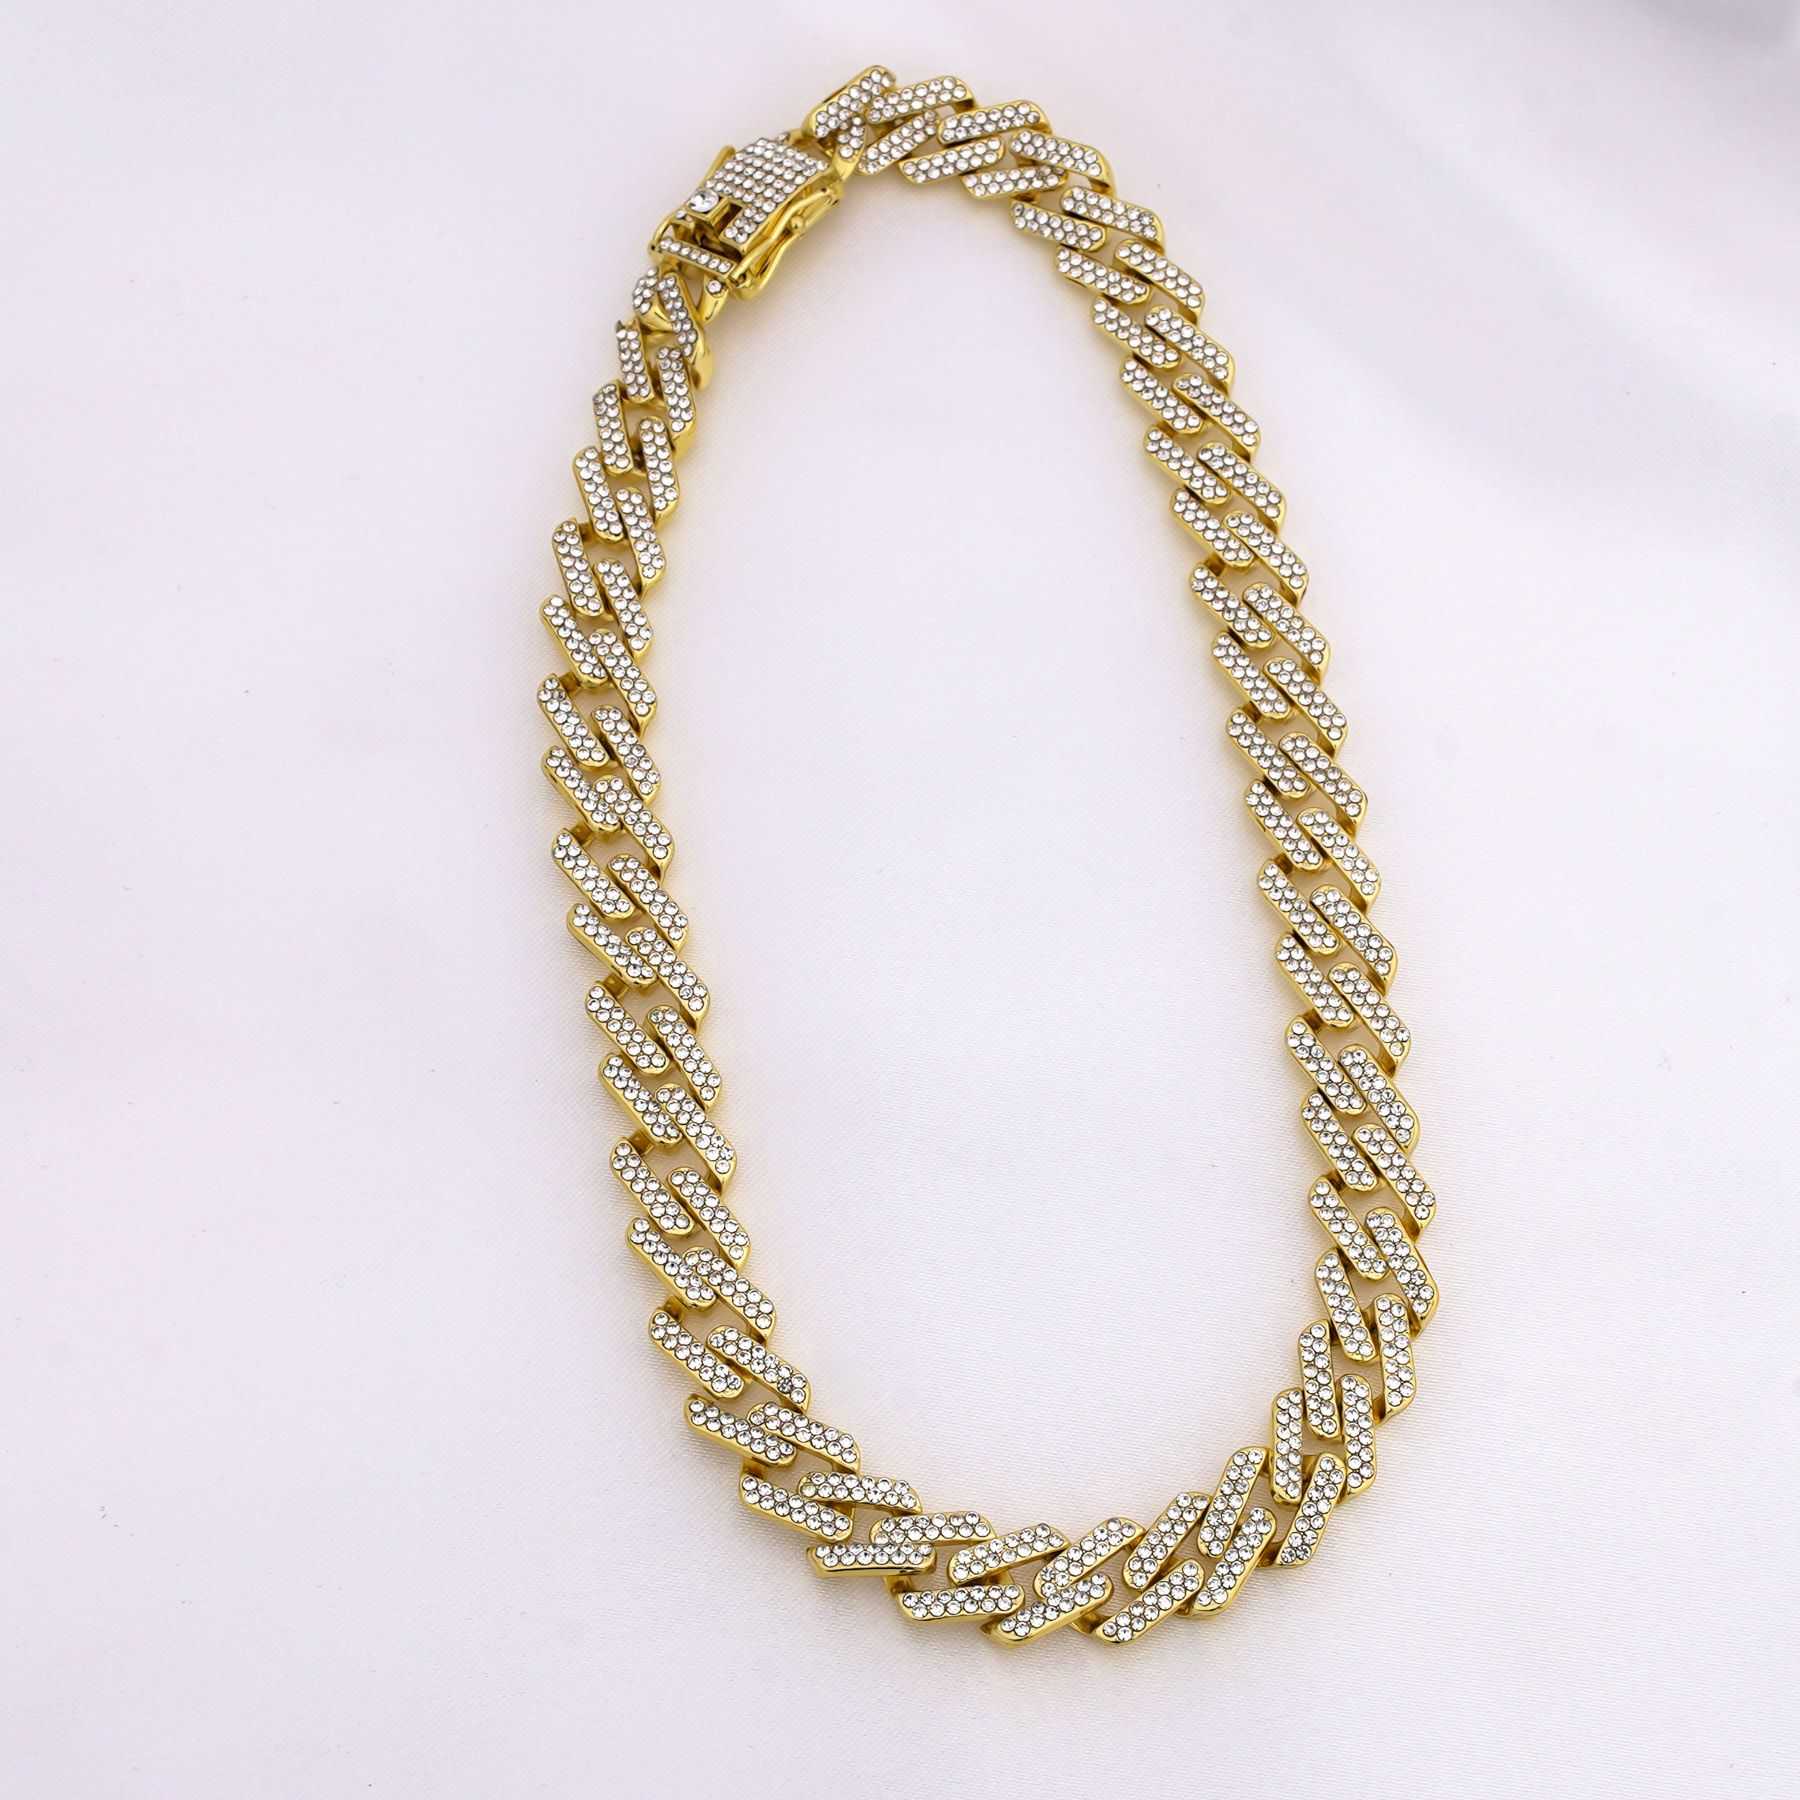 FAME CHAIN NECKLACE - GOLD